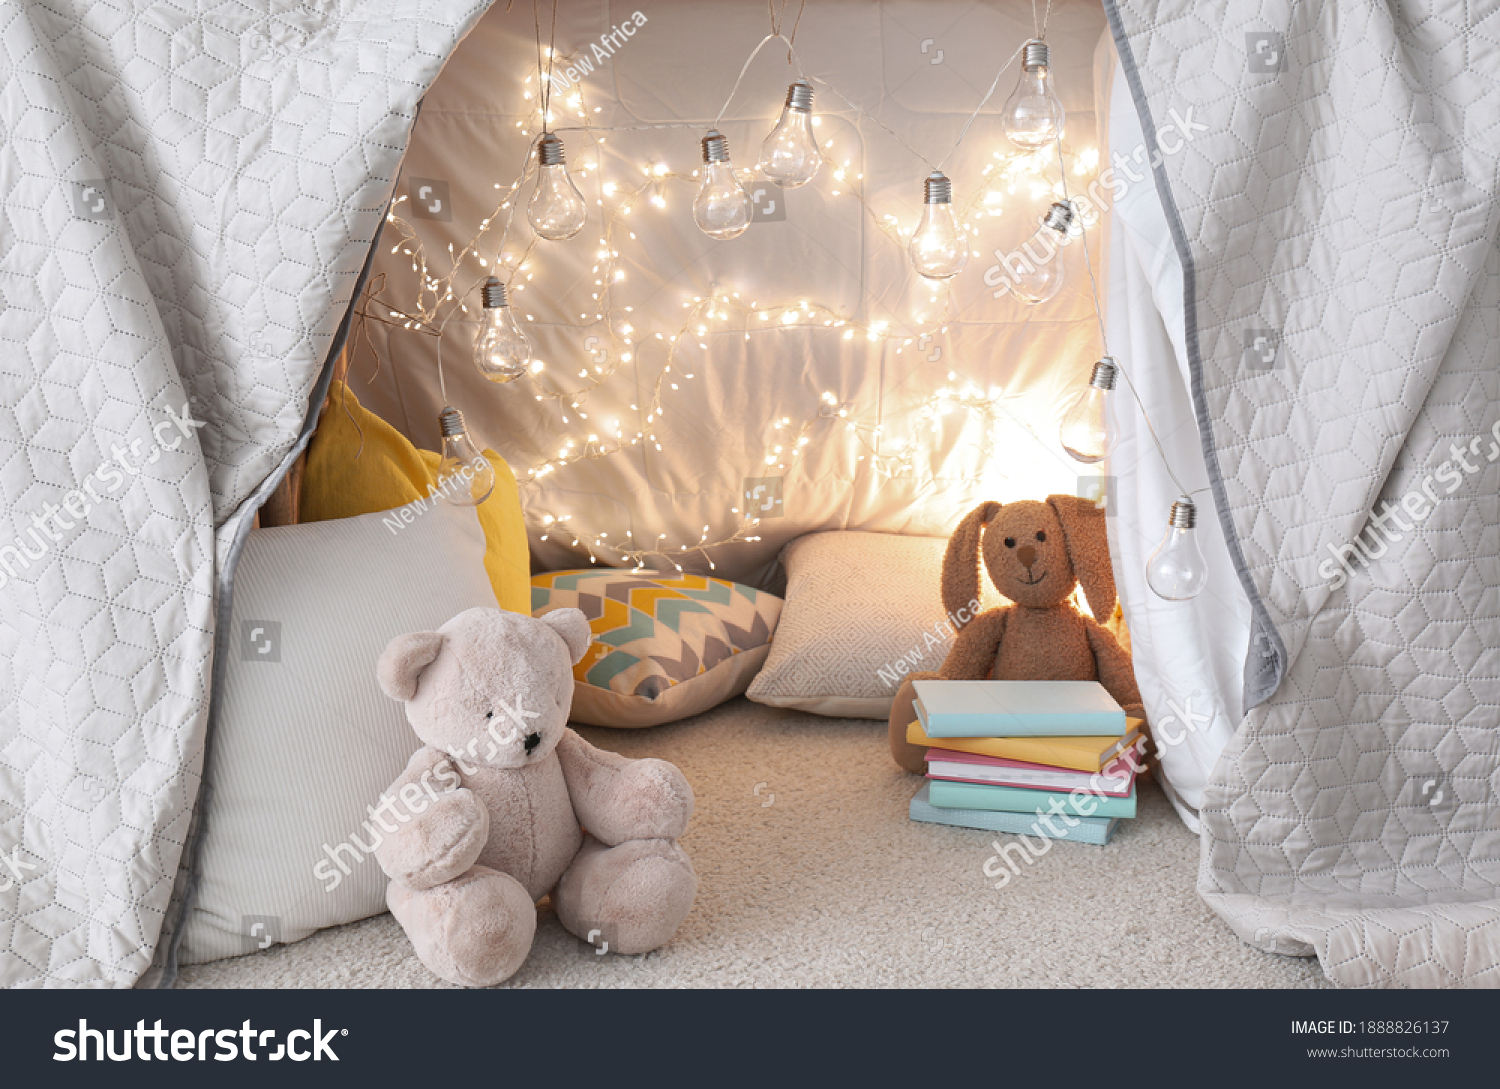 Play tent with toys and pillows indoors, closeup. Modern children's room interior #1888826137